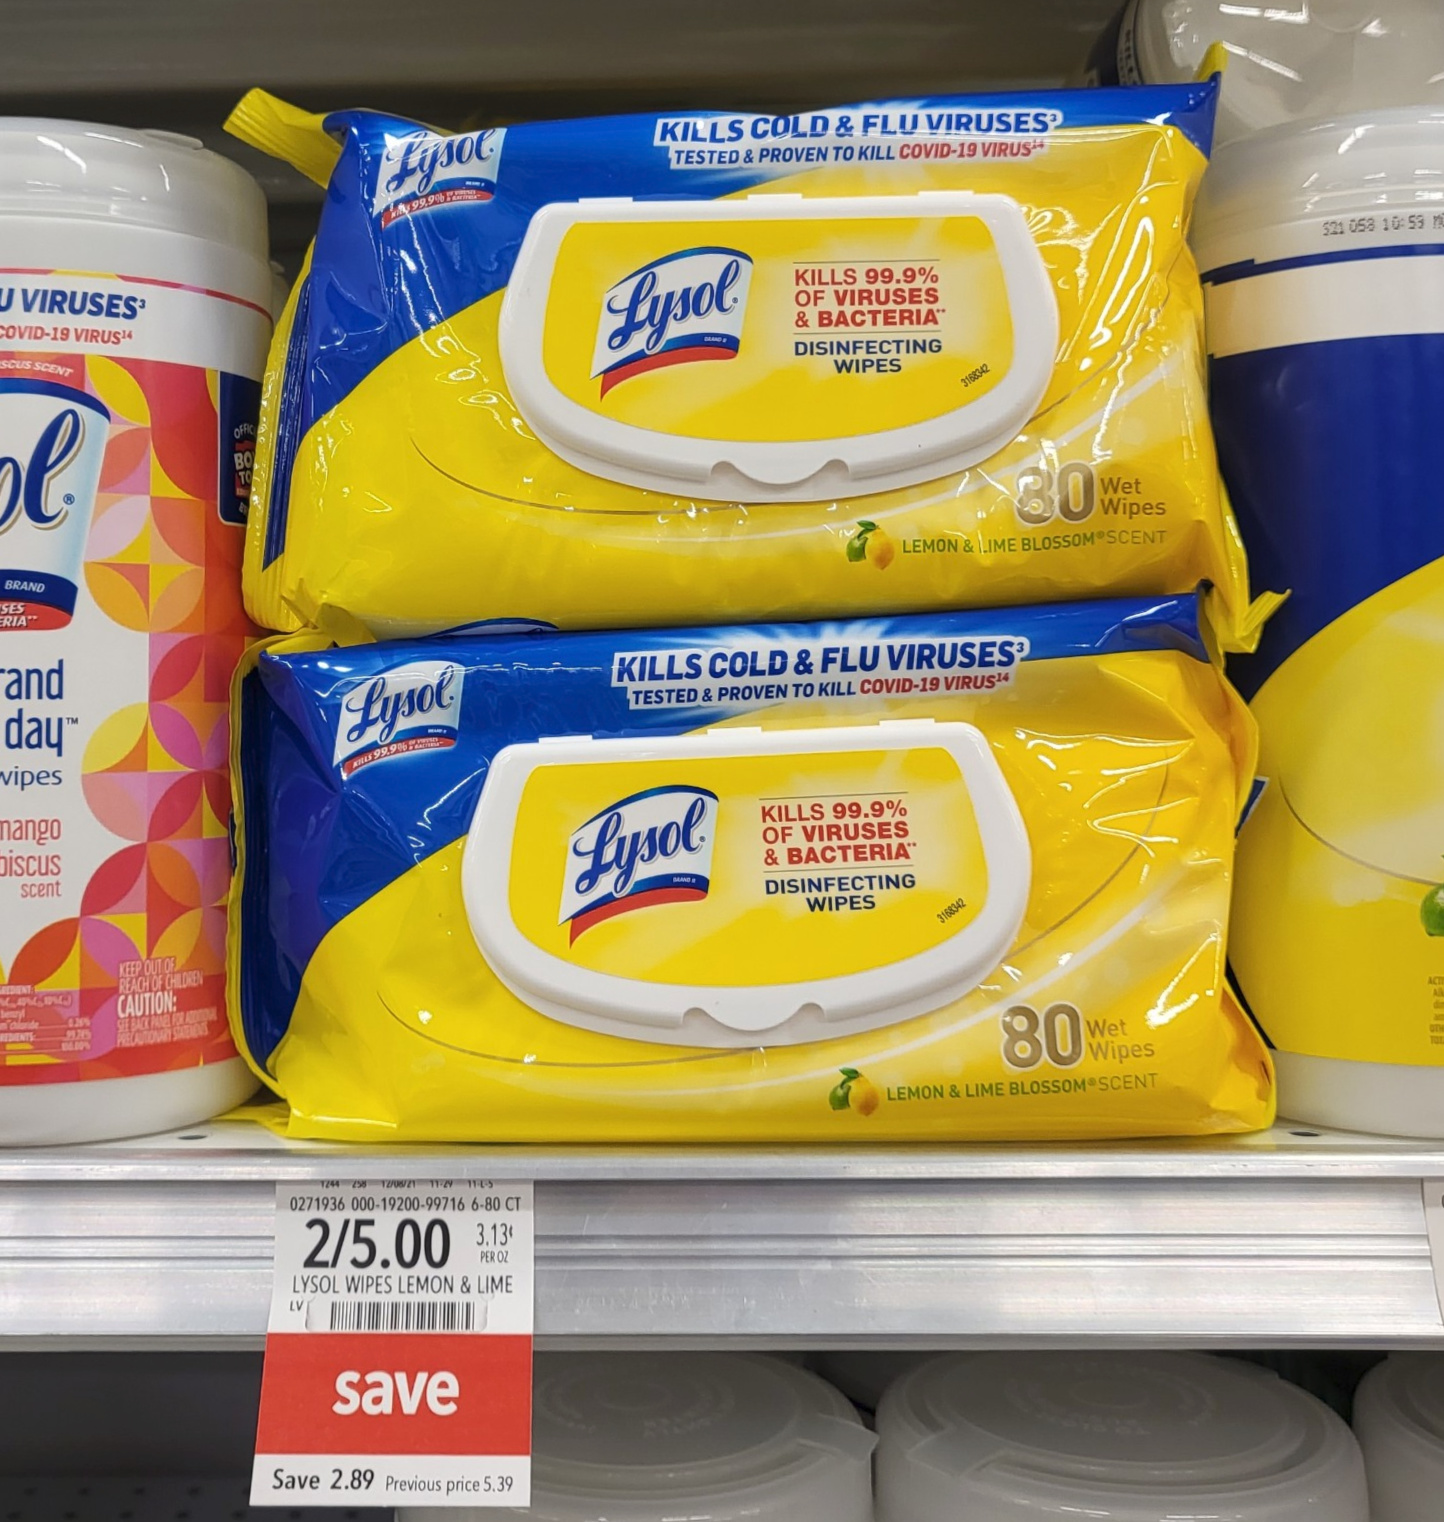 Lysol Disinfecting Wipes Flatpack As Low As FREE At Publix on I Heart Publix 3